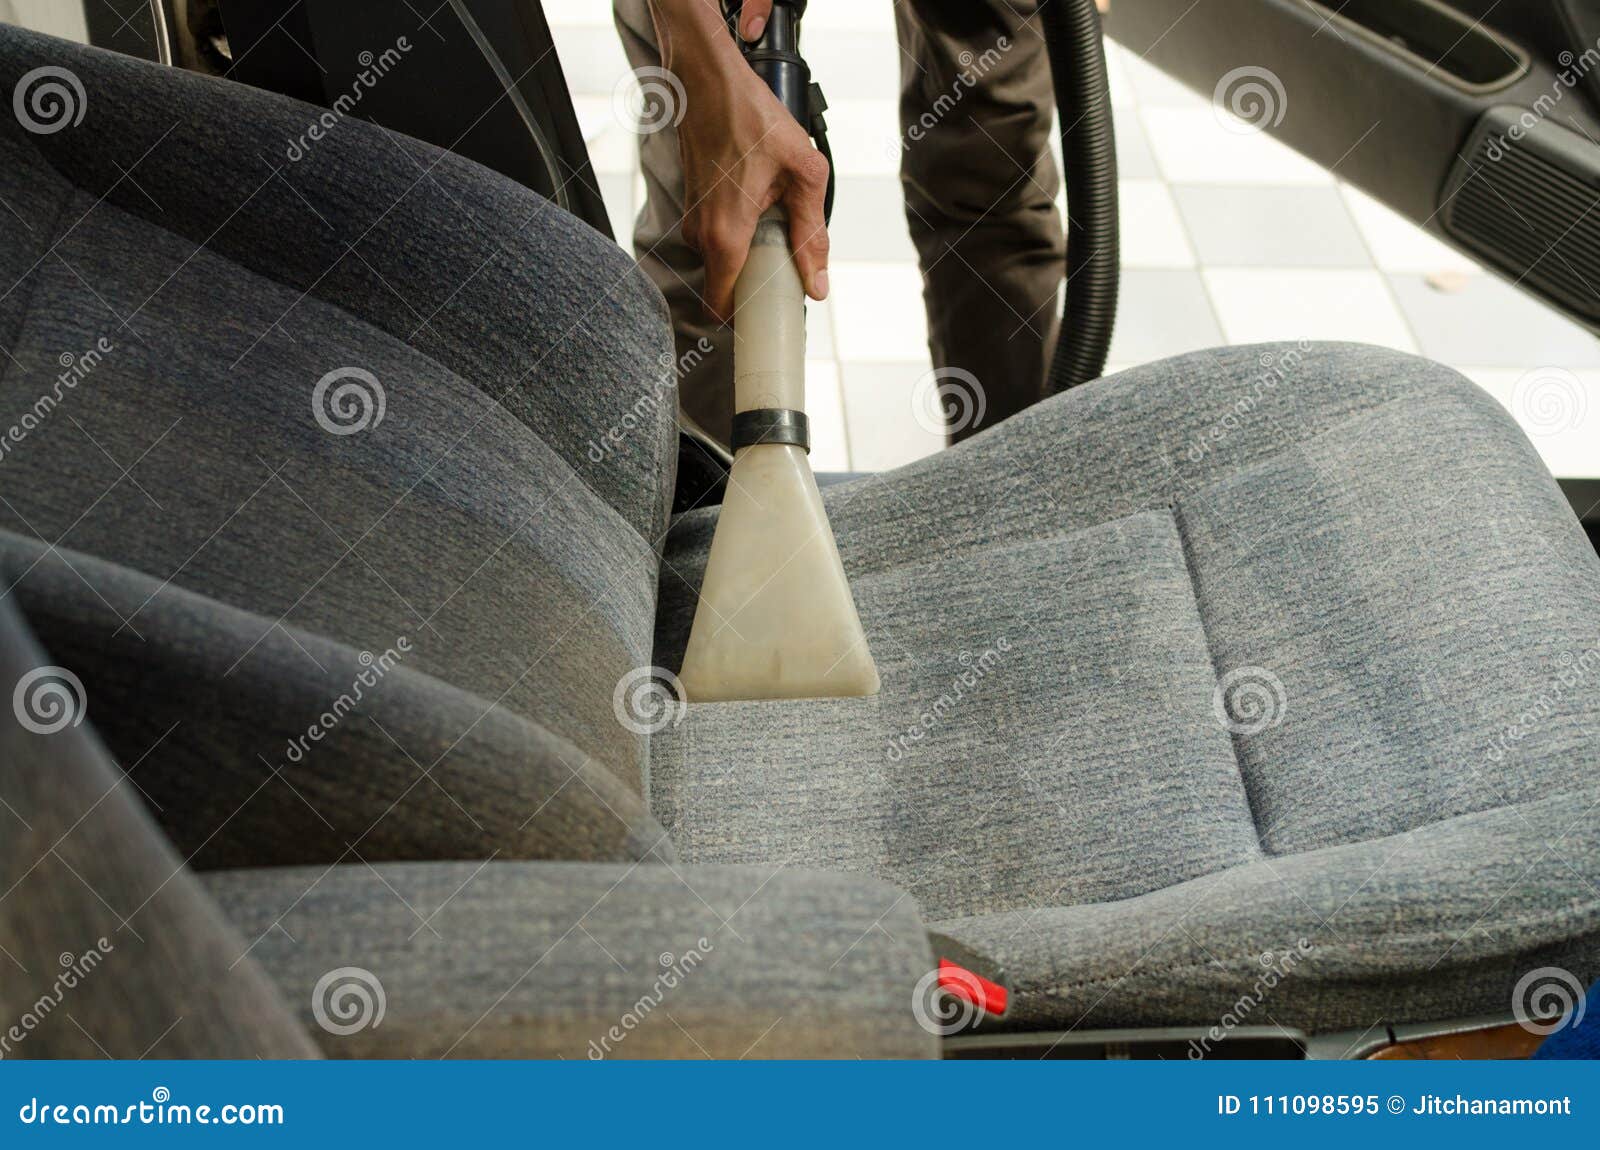 Cleaning of Car Seat with Wet Vacuum Cleaner Stock Image - Image of  interior, cleaning: 111098595